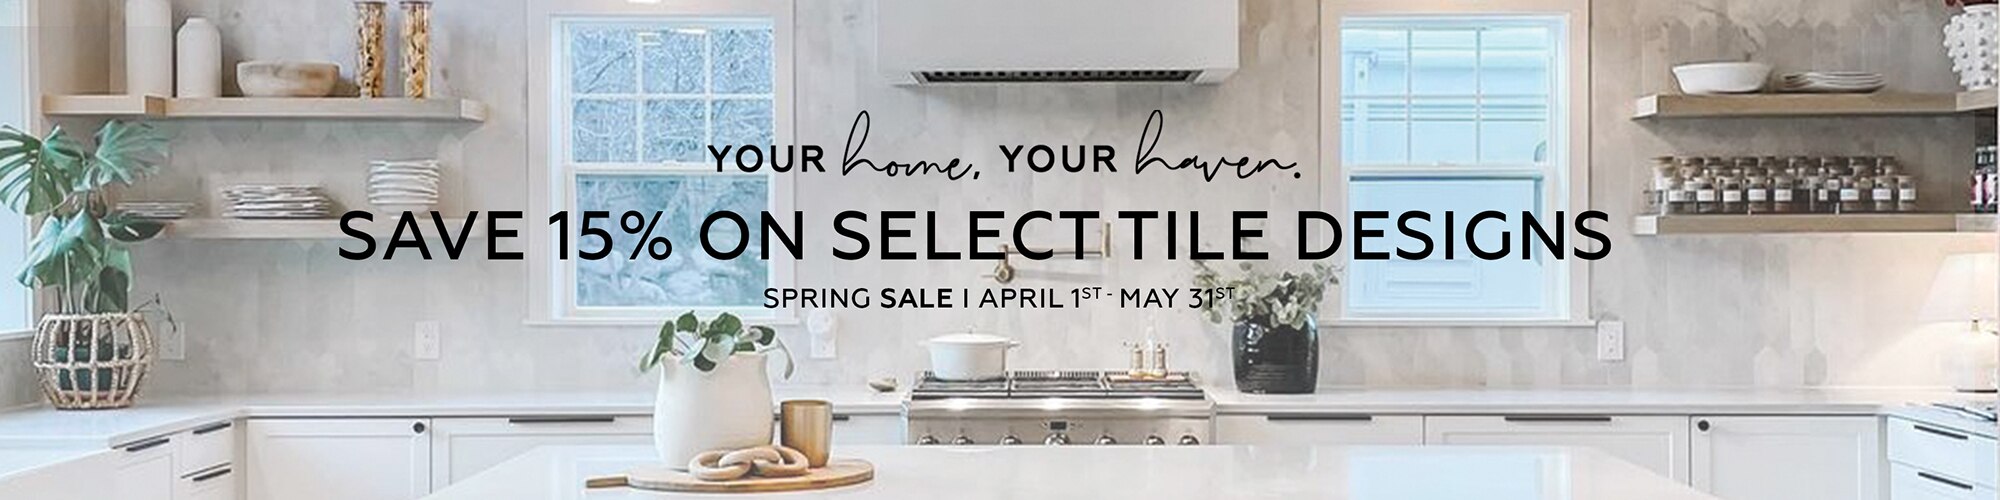 Your home. Your haven. Save 15% on select tile designs. Spring Sale | April 1st - May 31st